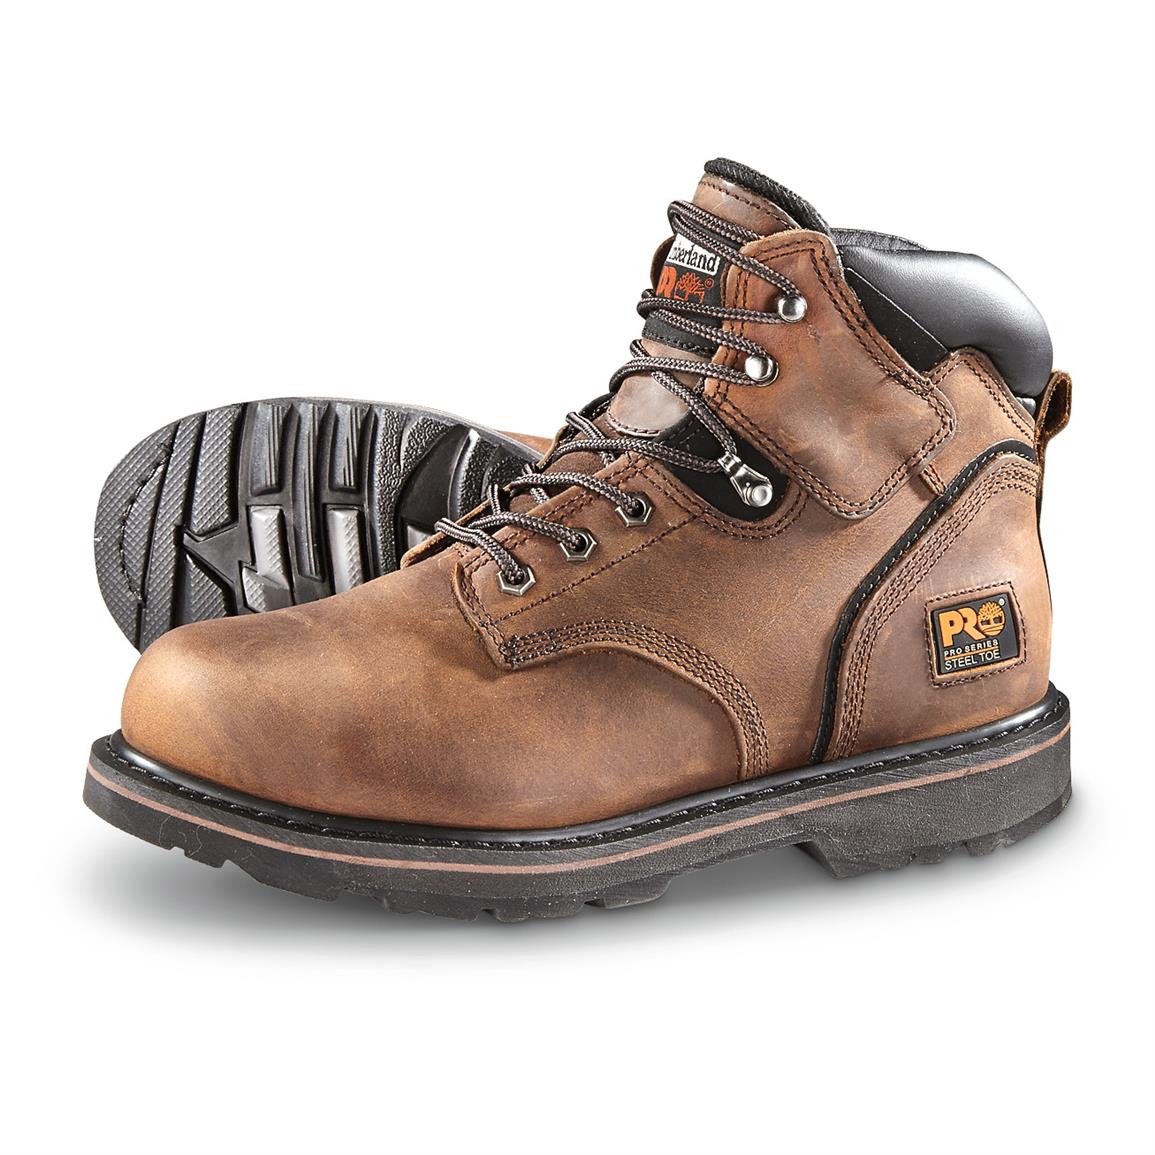 timberland pro work boots for sale near me